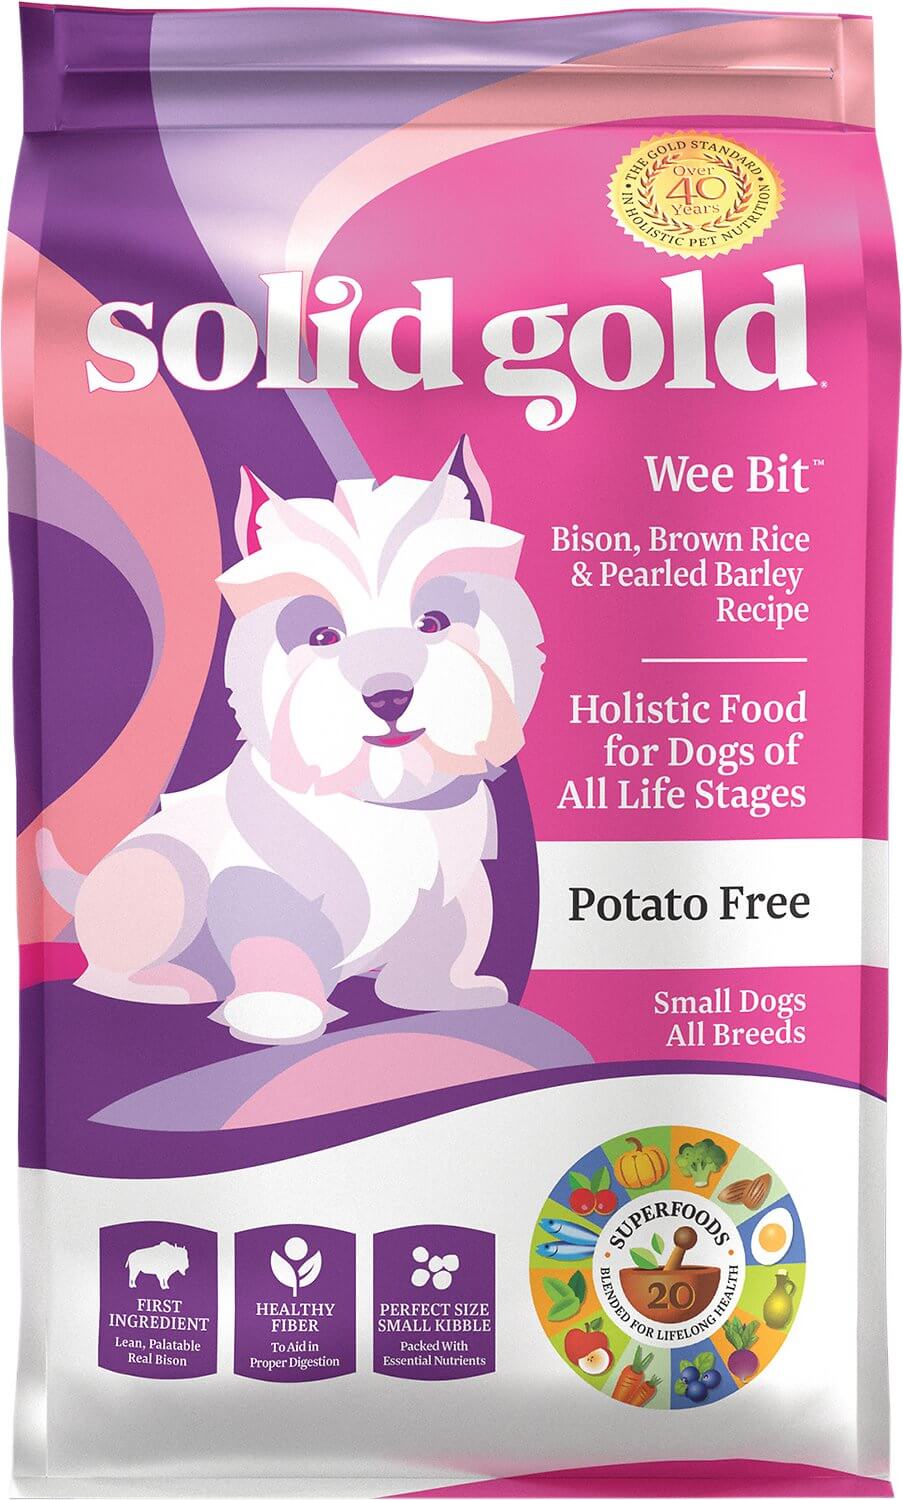 solid gold dog food small breeds